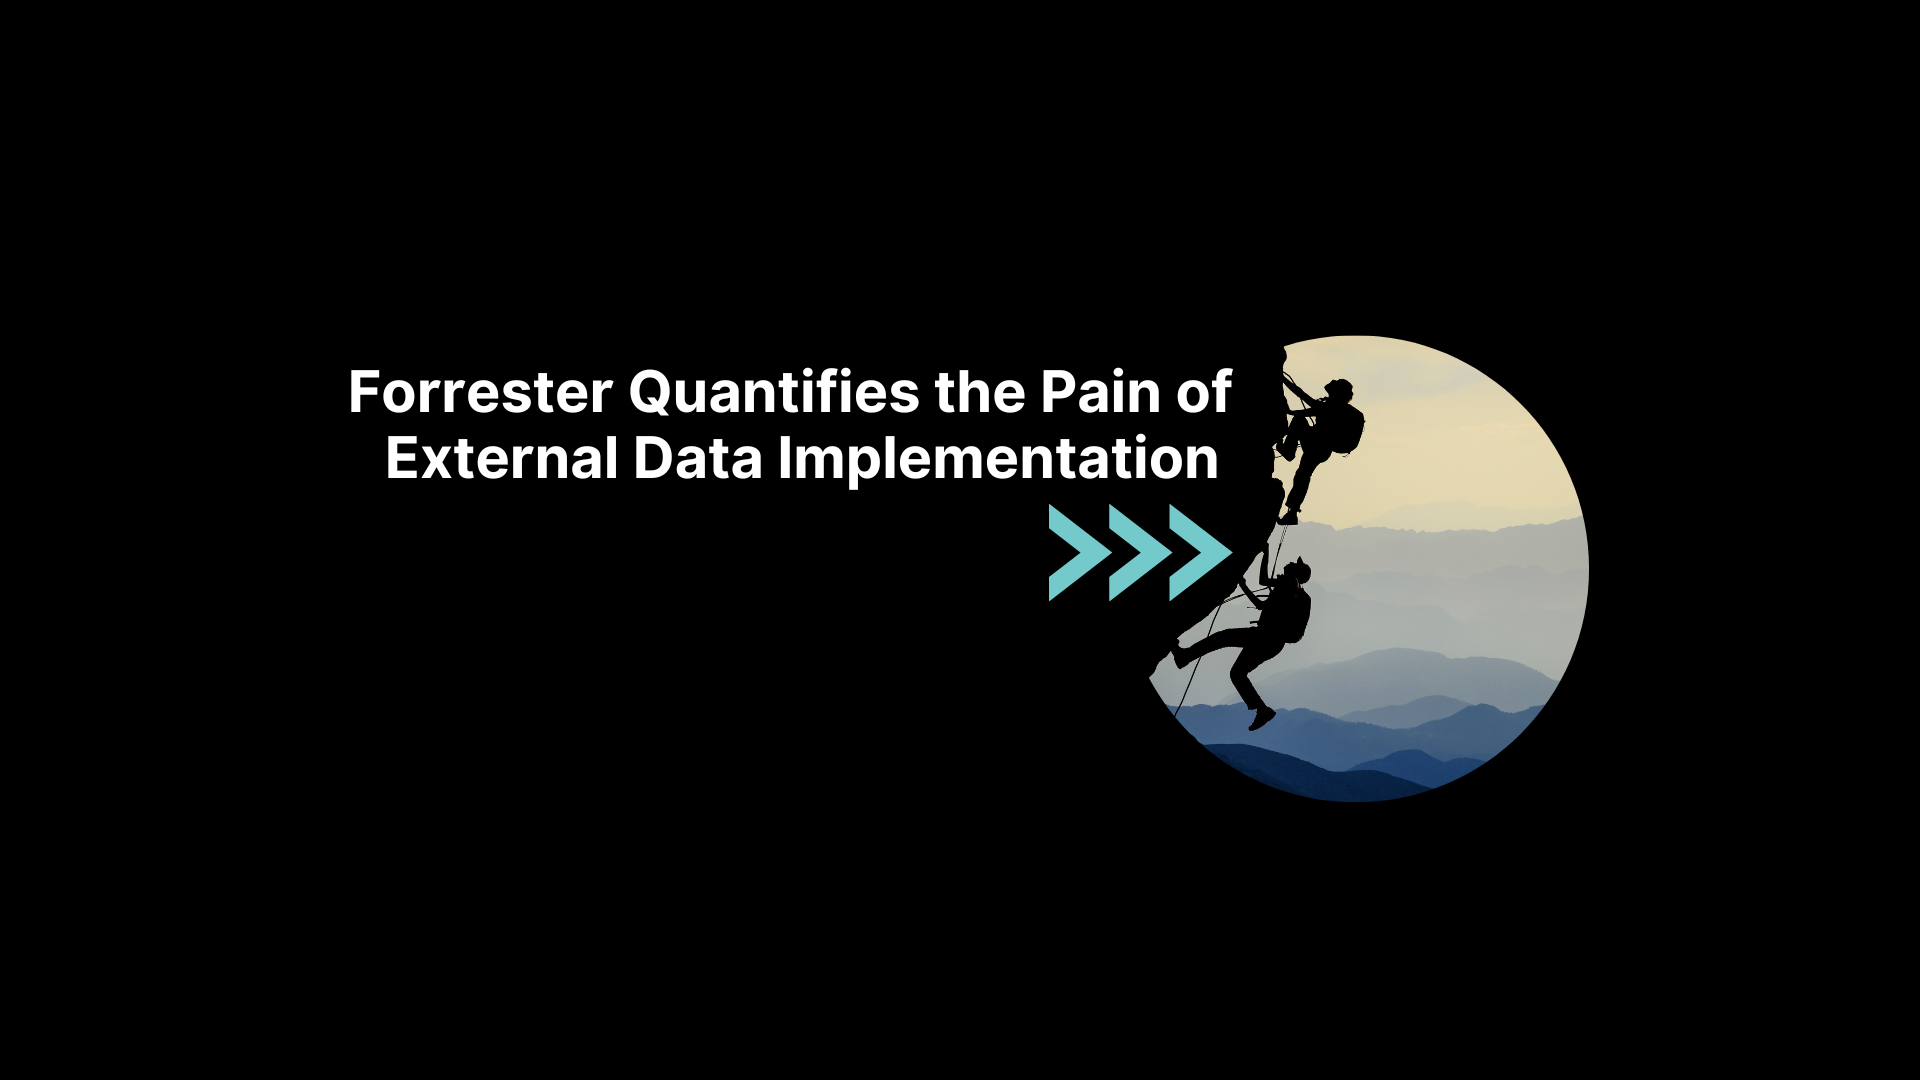 New Forrester Research Reveals Data Teams Spend 70% of Their Time on Prep & Plumbing of External Data